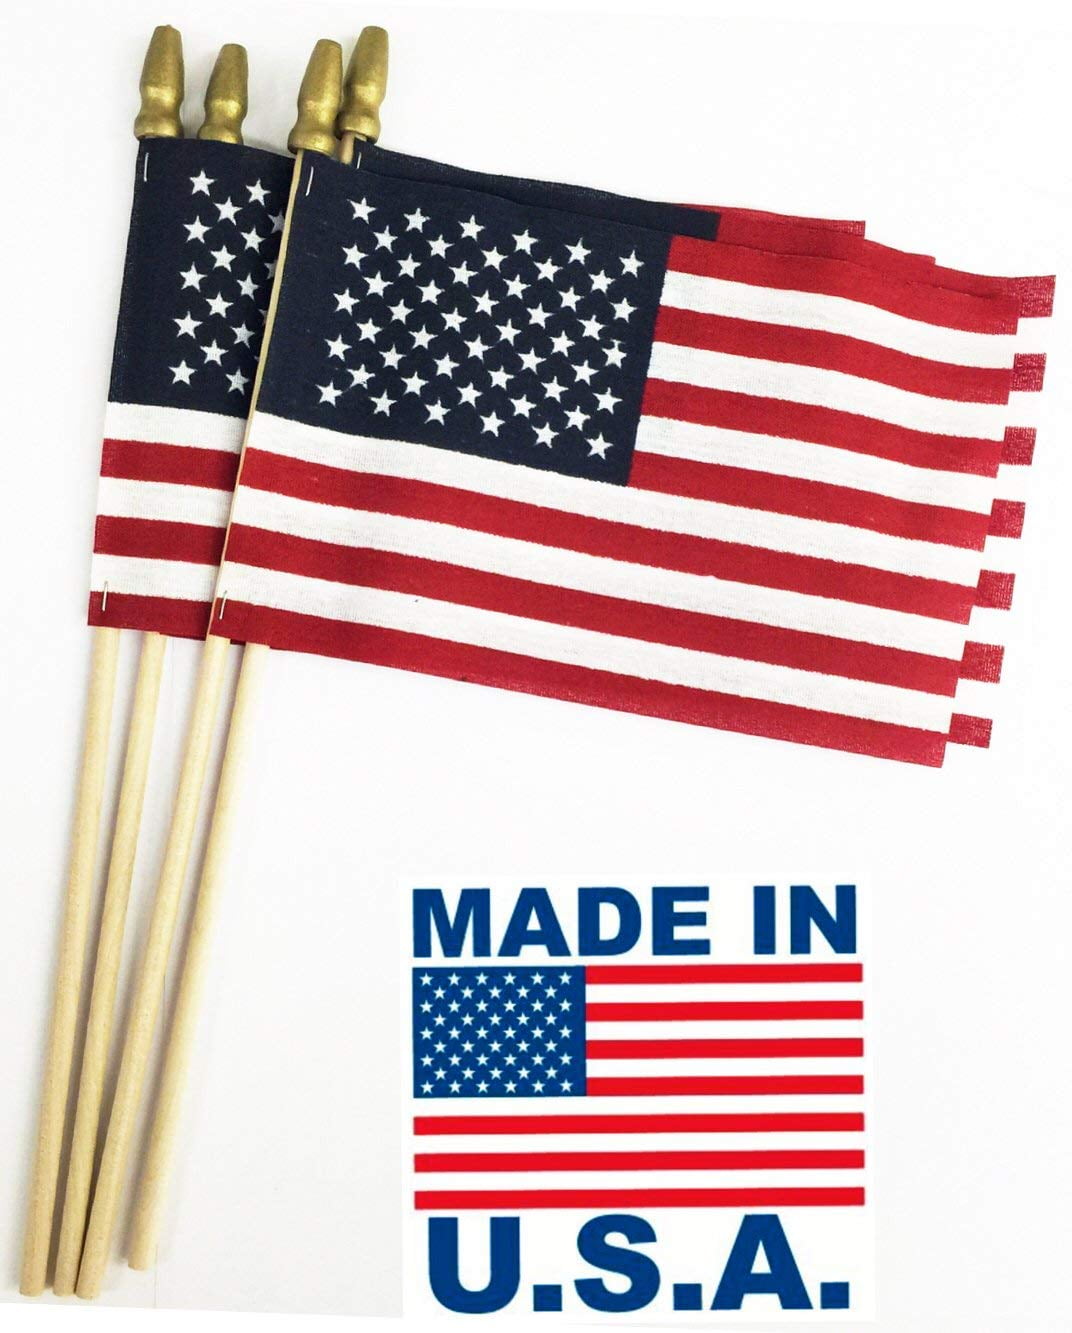 Handheld American Flag USA 2 PACK Stick Pole Flags Fast Free Shipping 